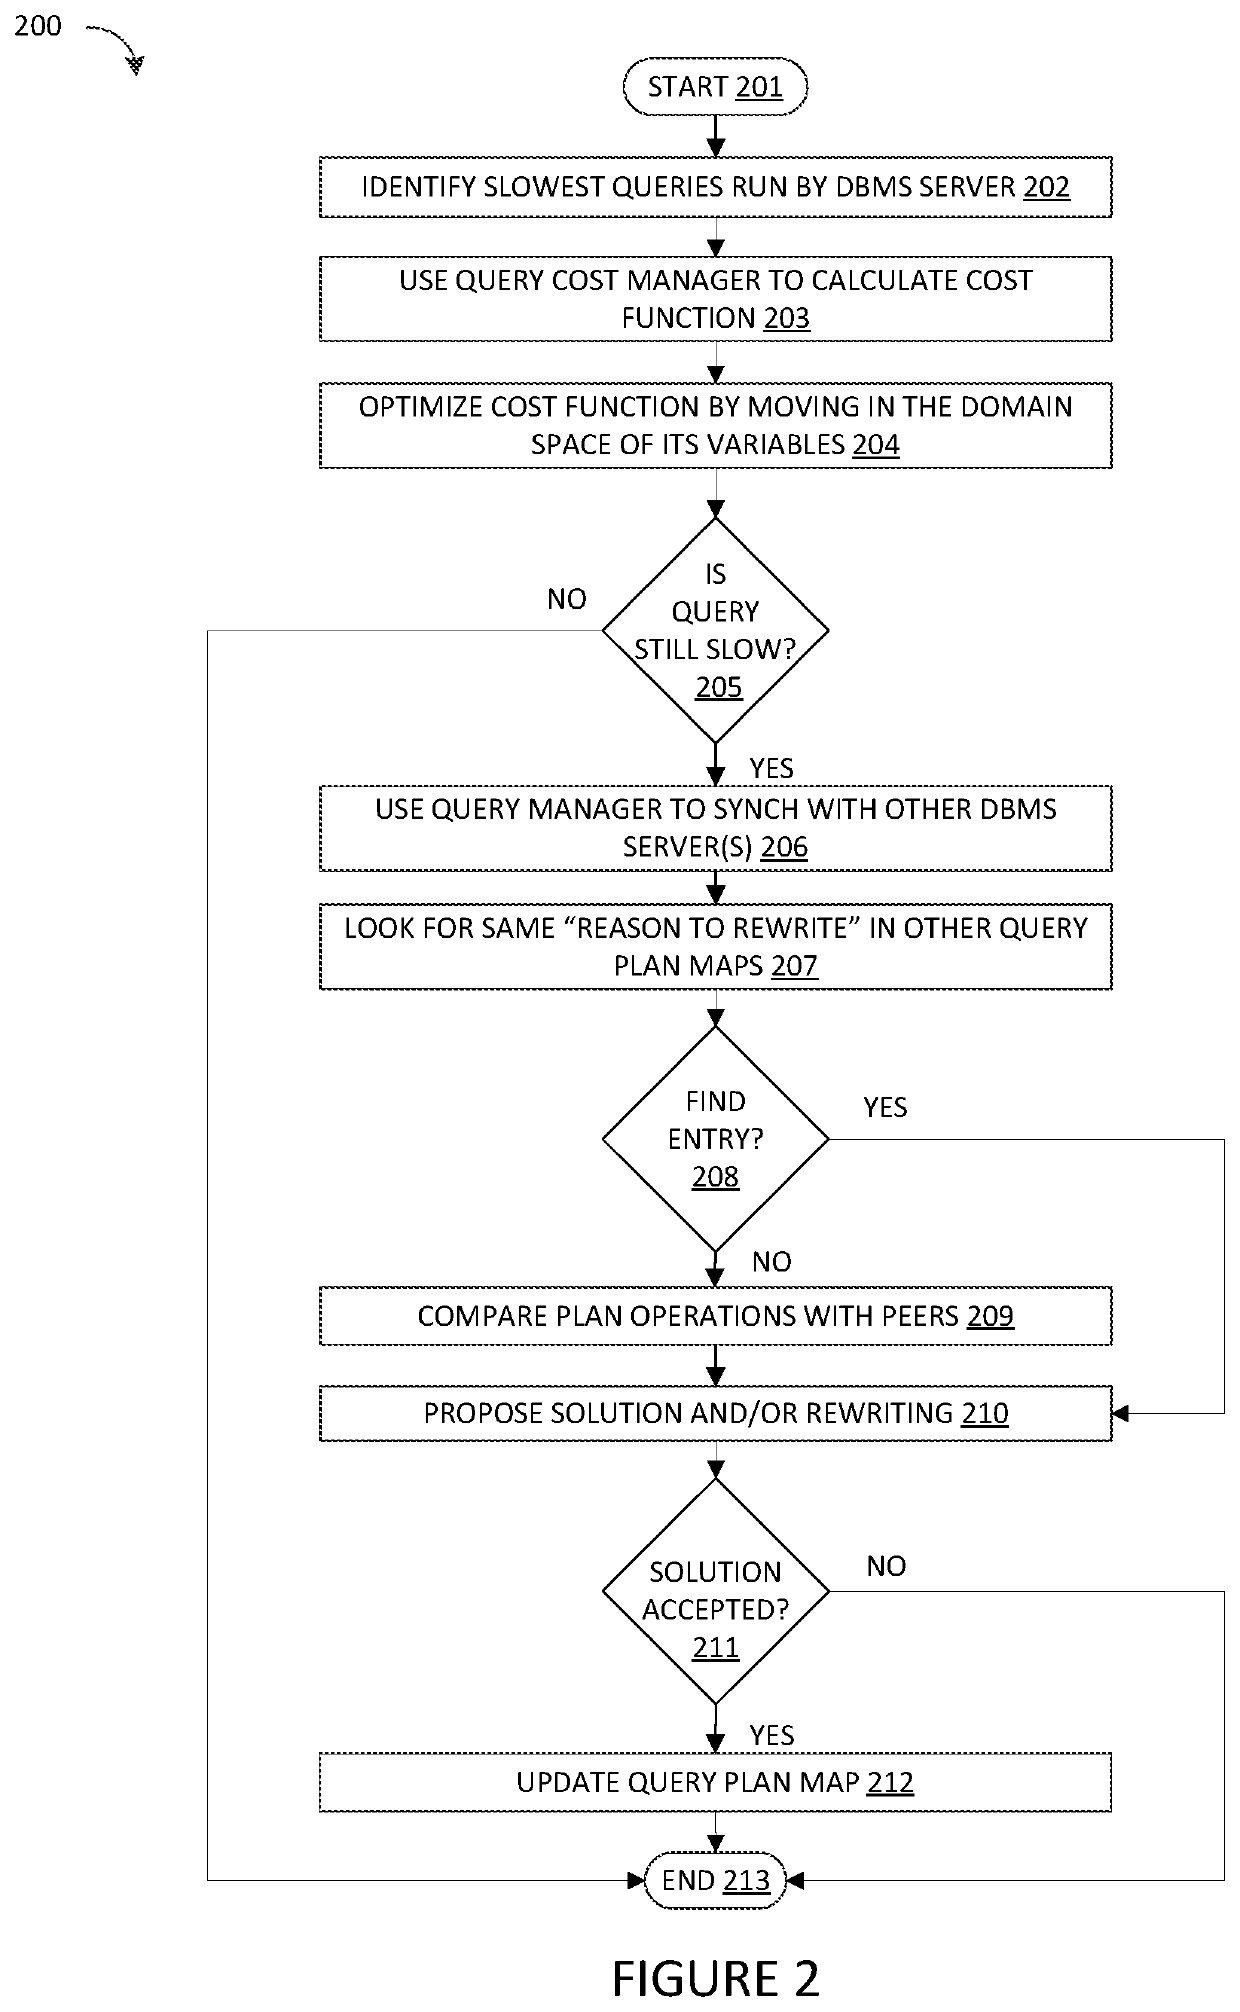 Method and System for Collaborative and Dynamic Query Optimization in a DBMS Network